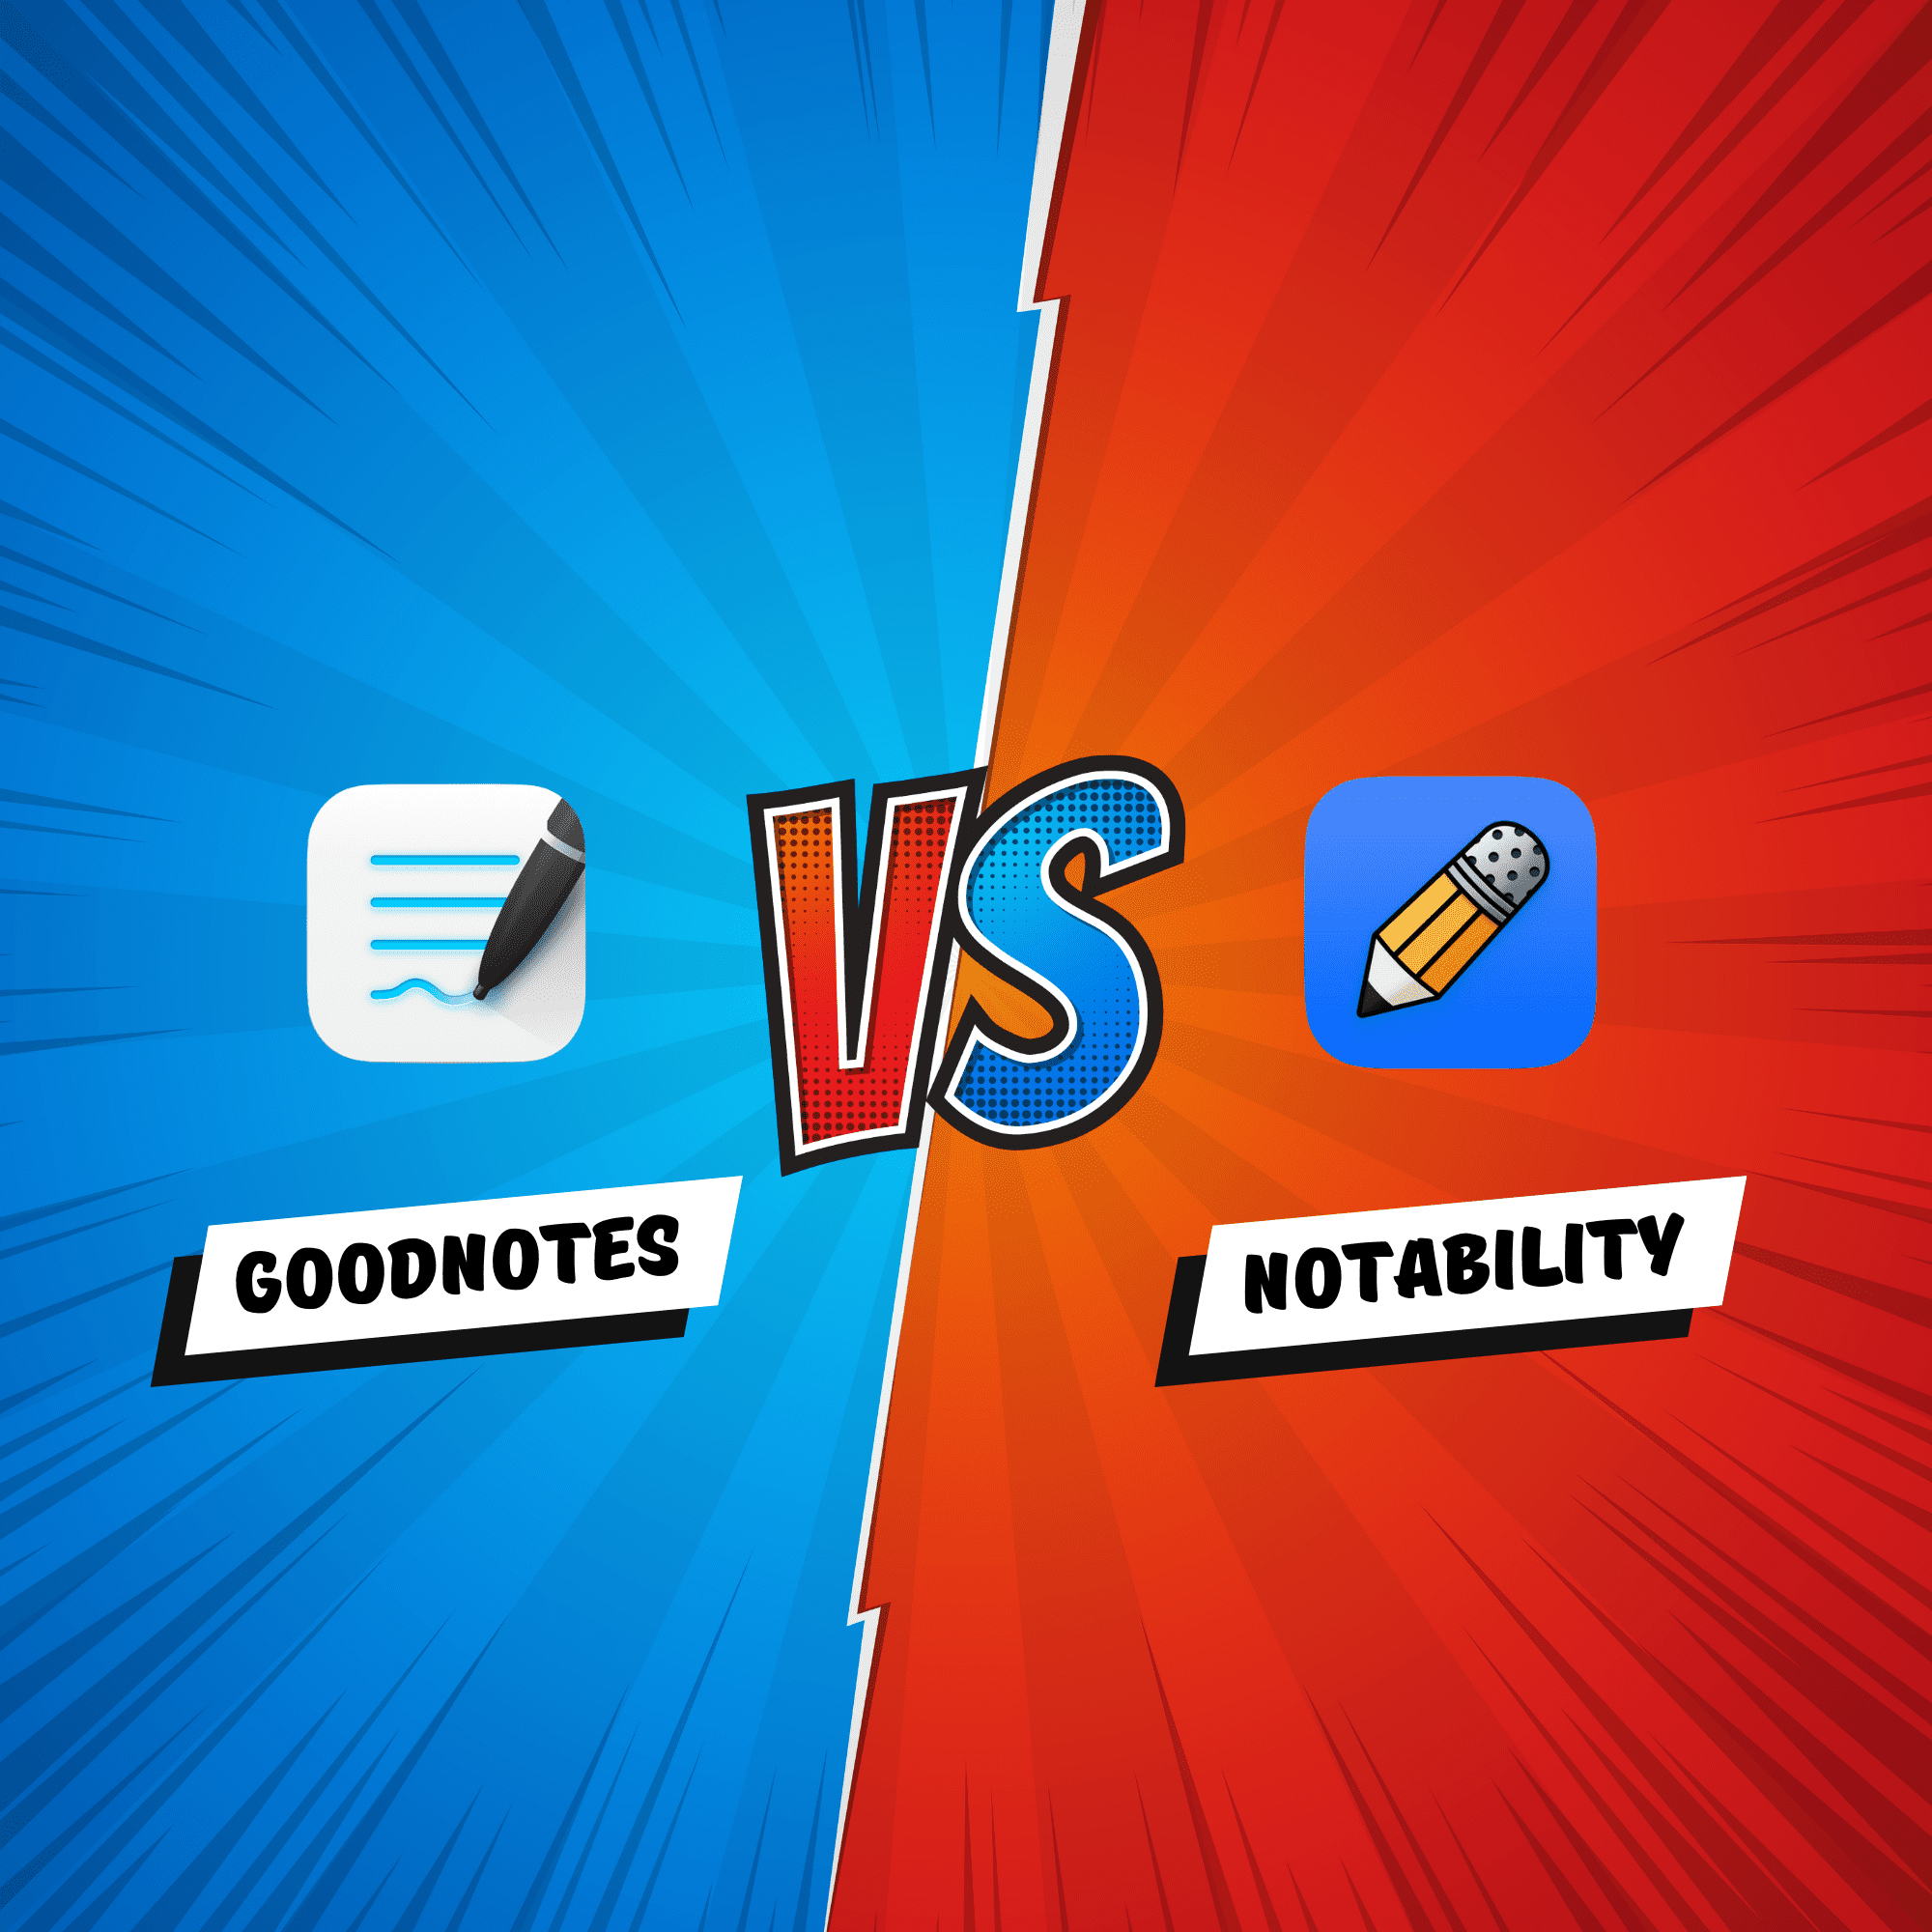 goodnotes vs notability: which note-taking app is better?